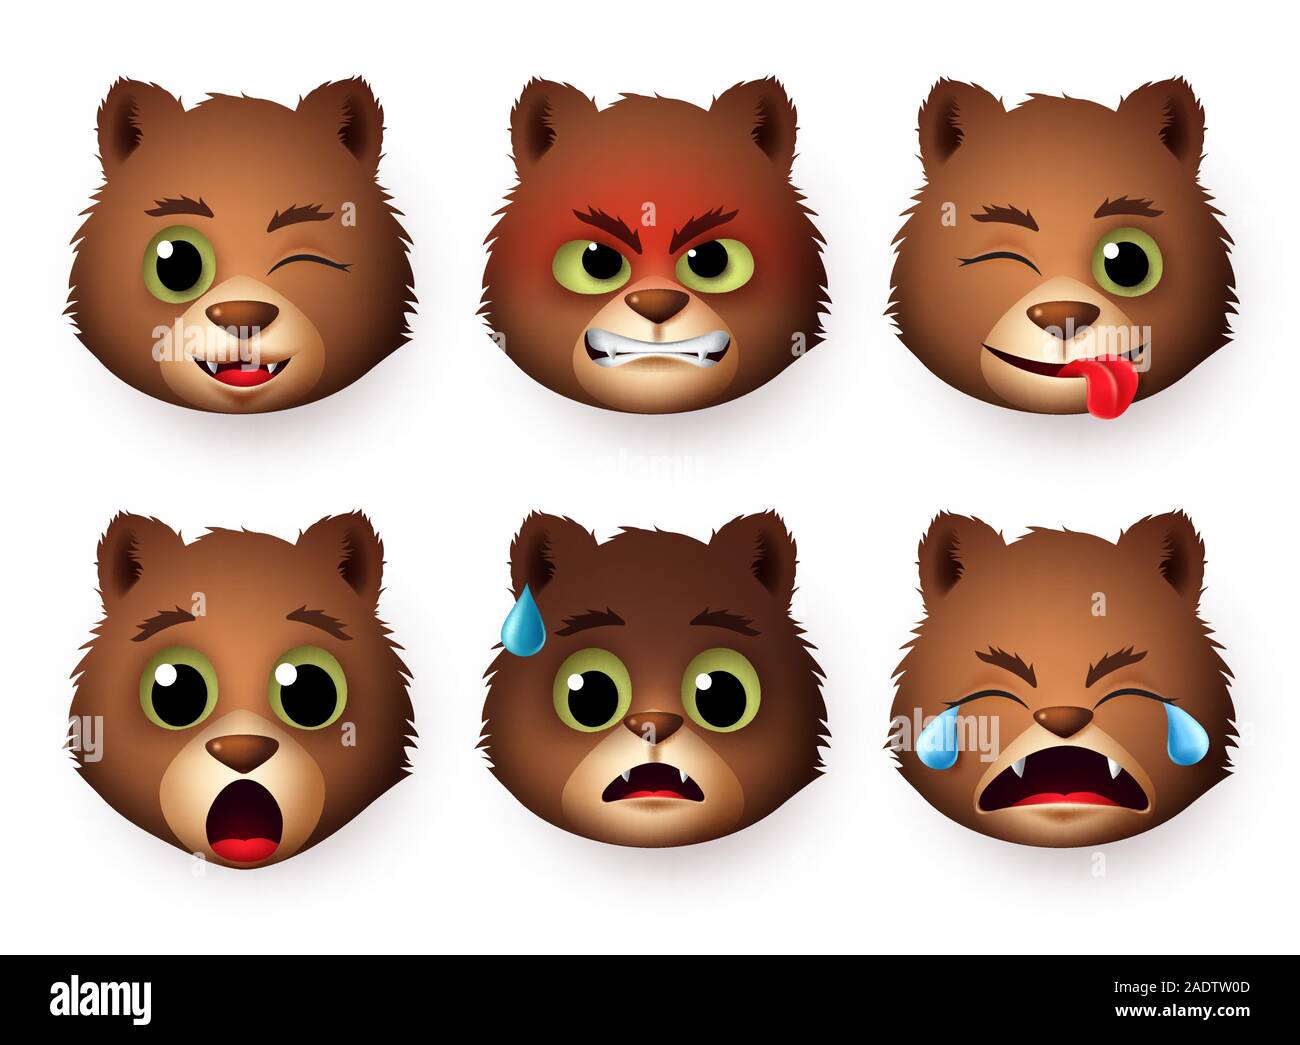 Pandas emoticon face vector set. Emoji of panda bear head animal in angry, scared, crying, and surprise facial expressions isolated. Stock Vector